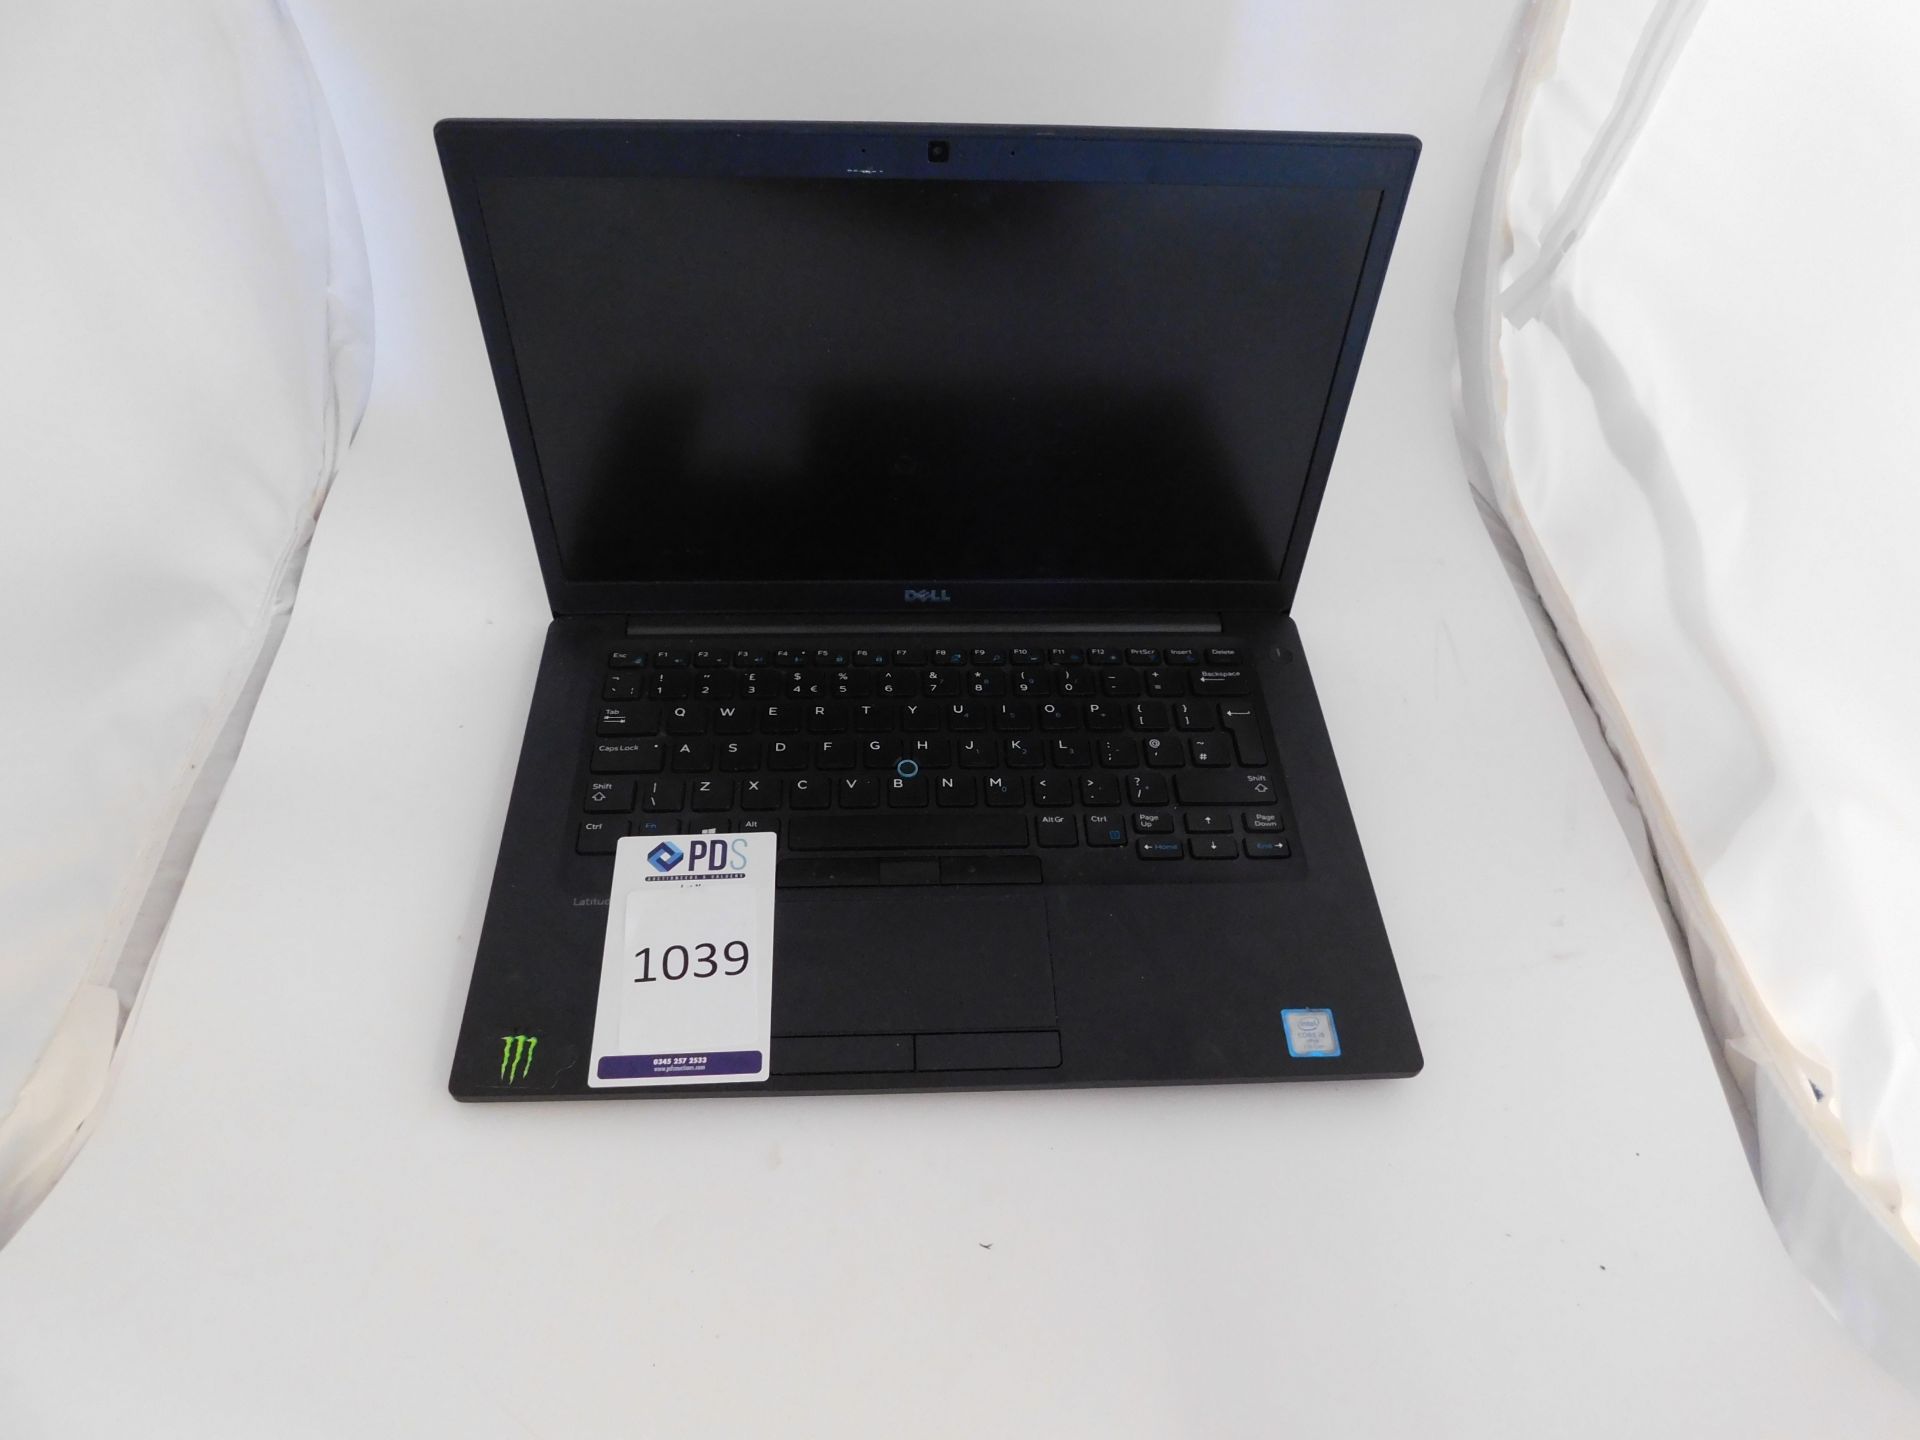 Dell Latitude 7480 Laptop, i5, No PSU (No HDD) (Location Stockport. Please Refer to General Notes)